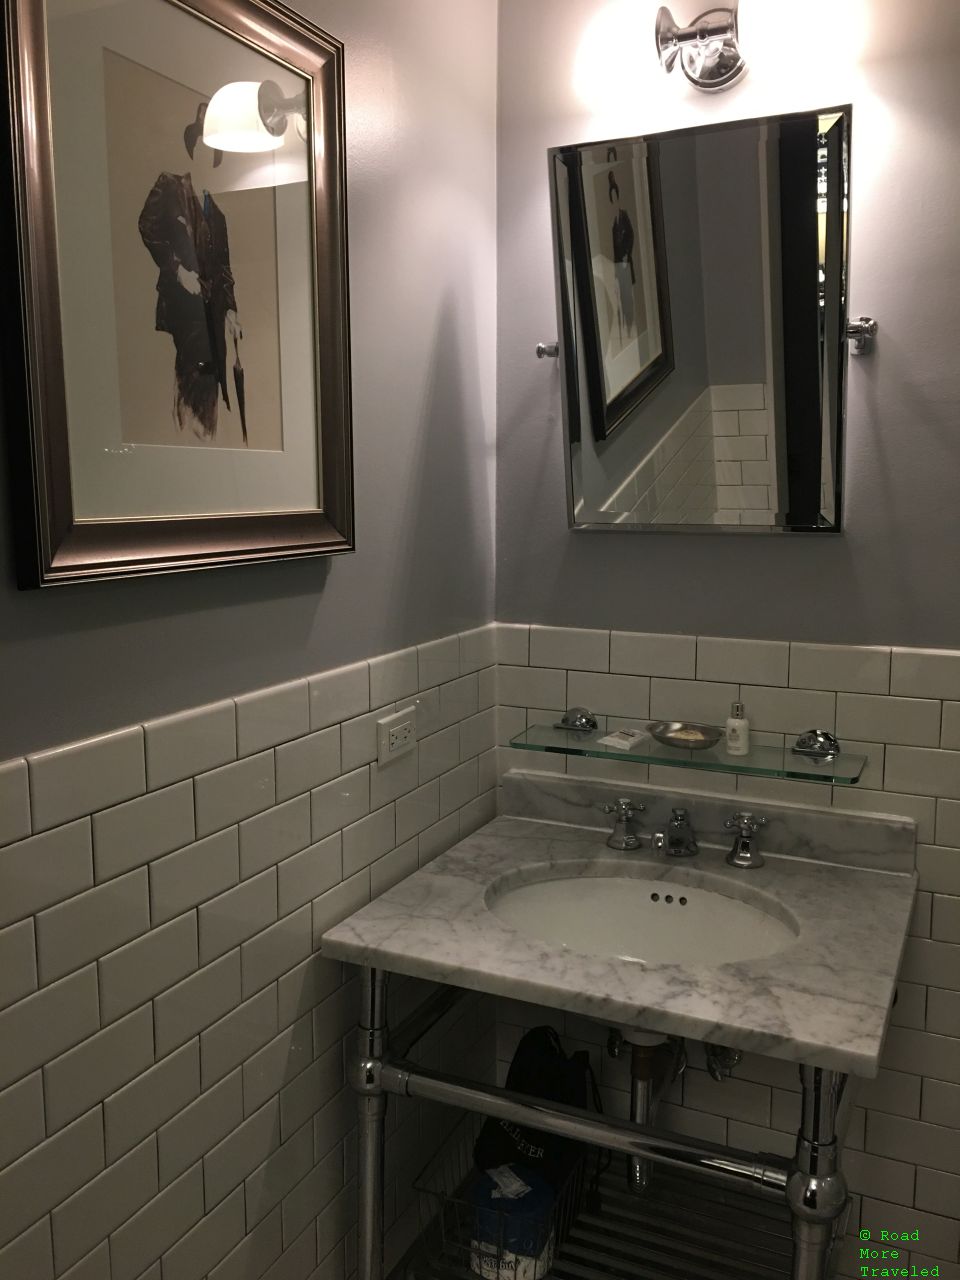 Q&C Hotel Bar, Autograph Collection by New Orleans - bathroom